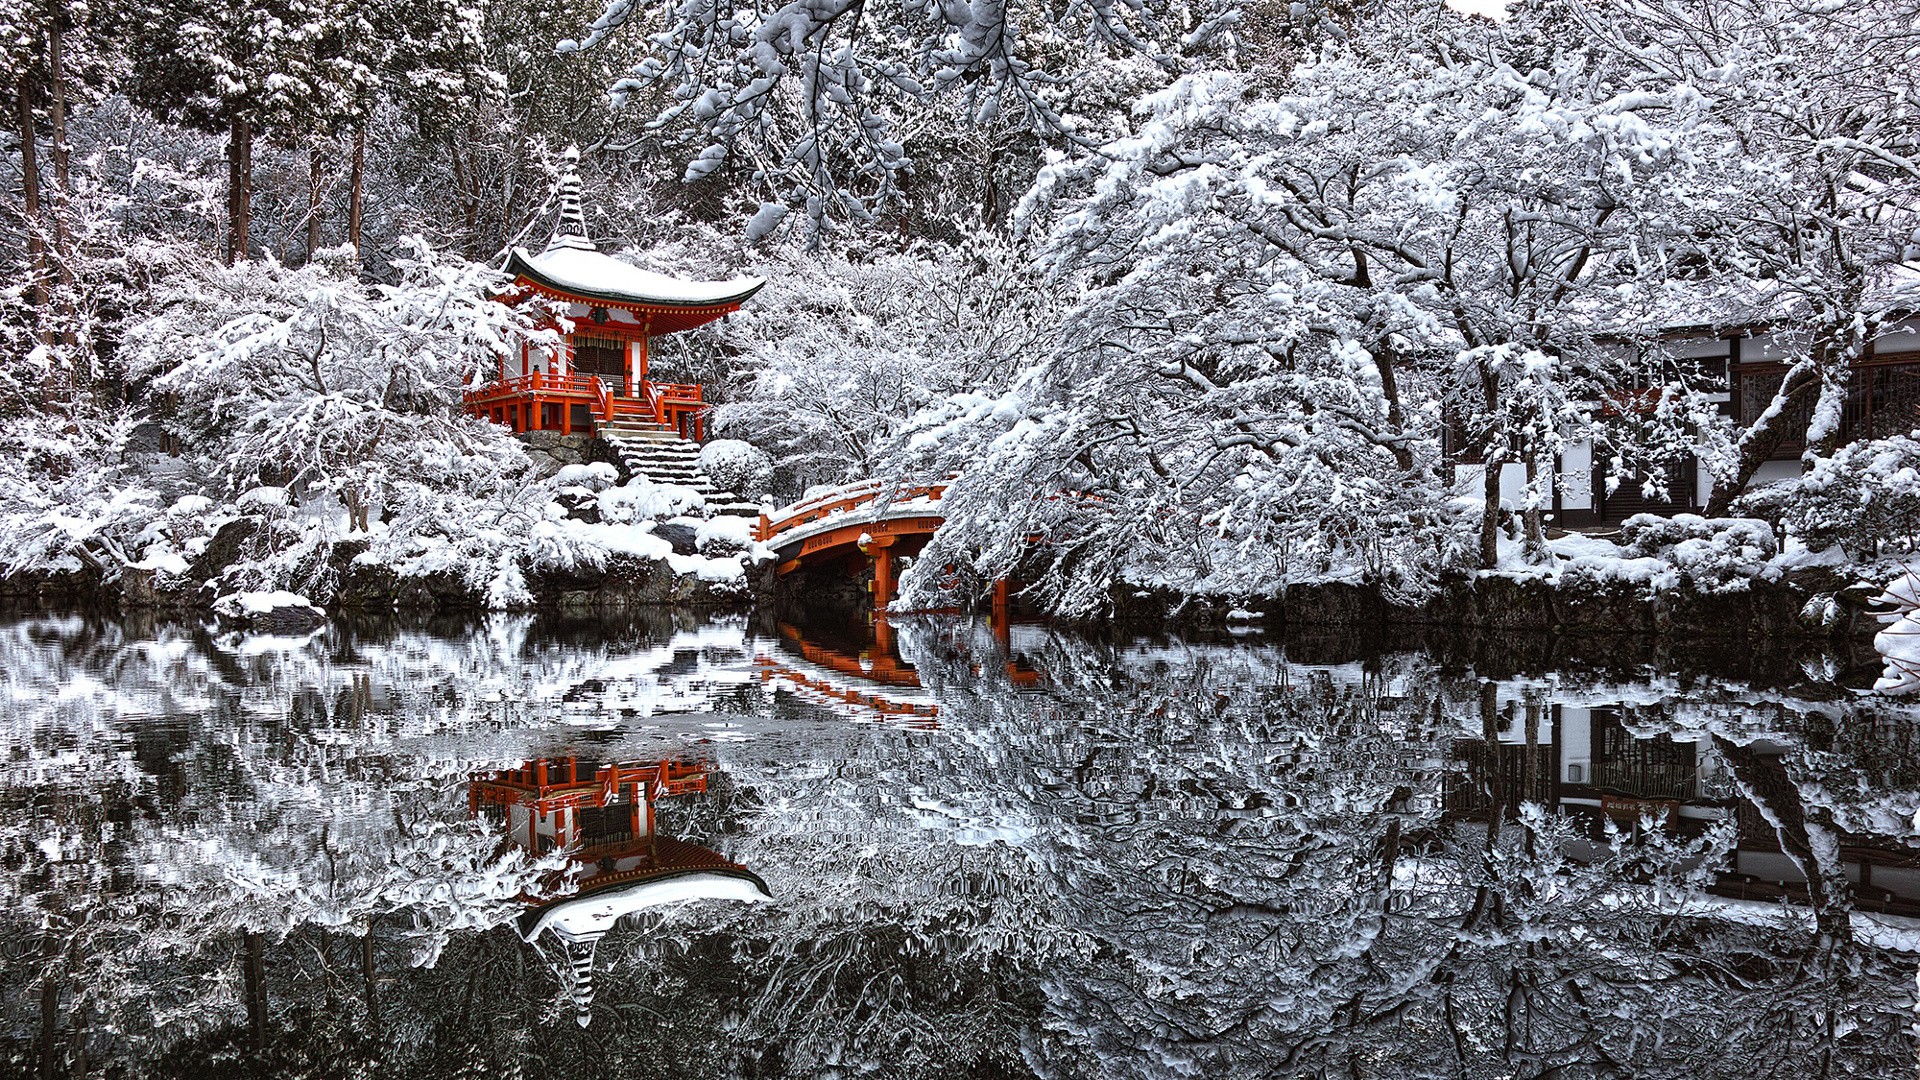 General 1920x1080 Japan temple snow winter reflection pond Kyoto Asia cold ice